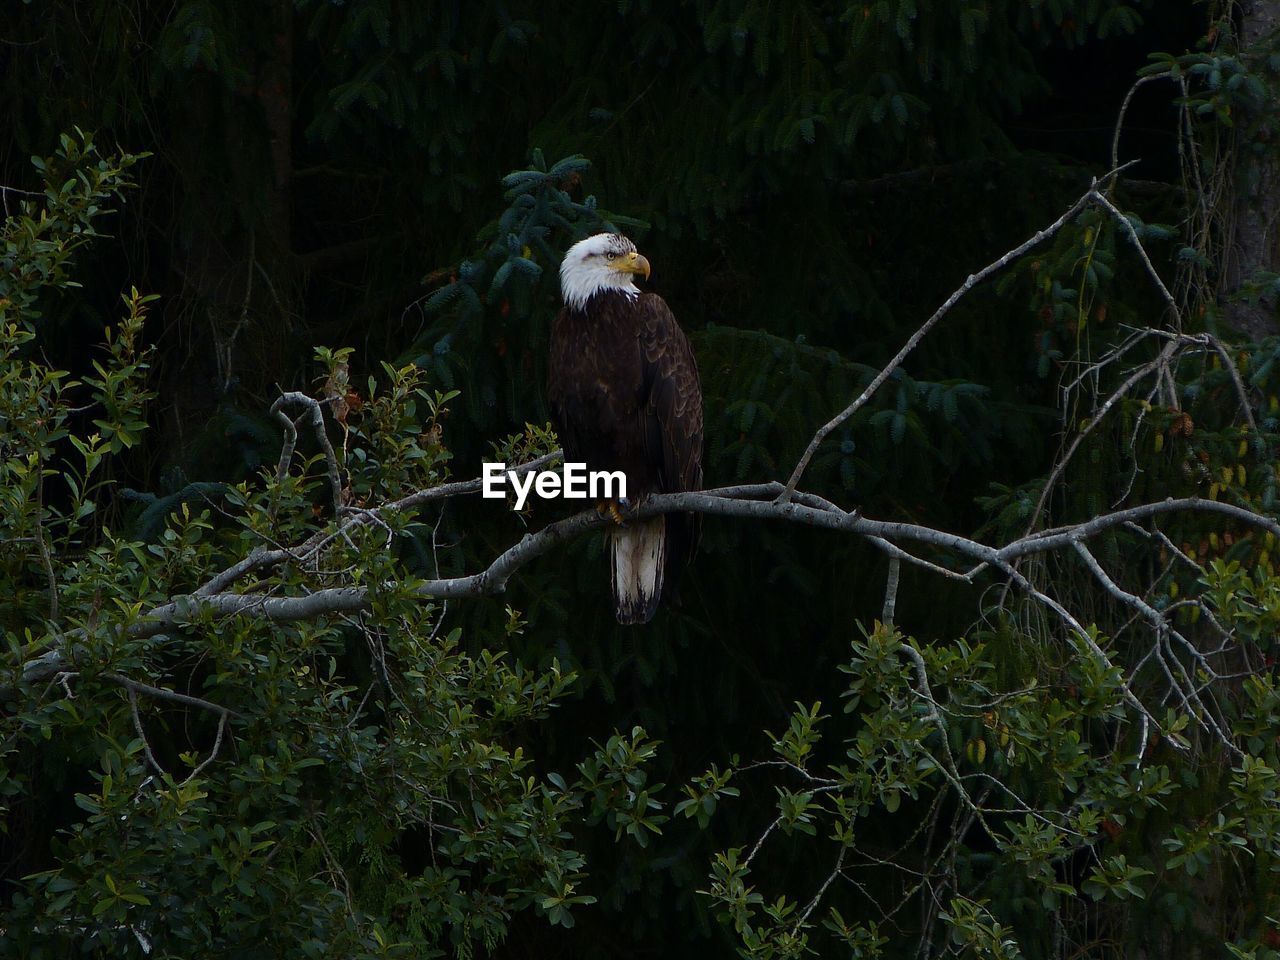 Bald eagle perching on branch in forest